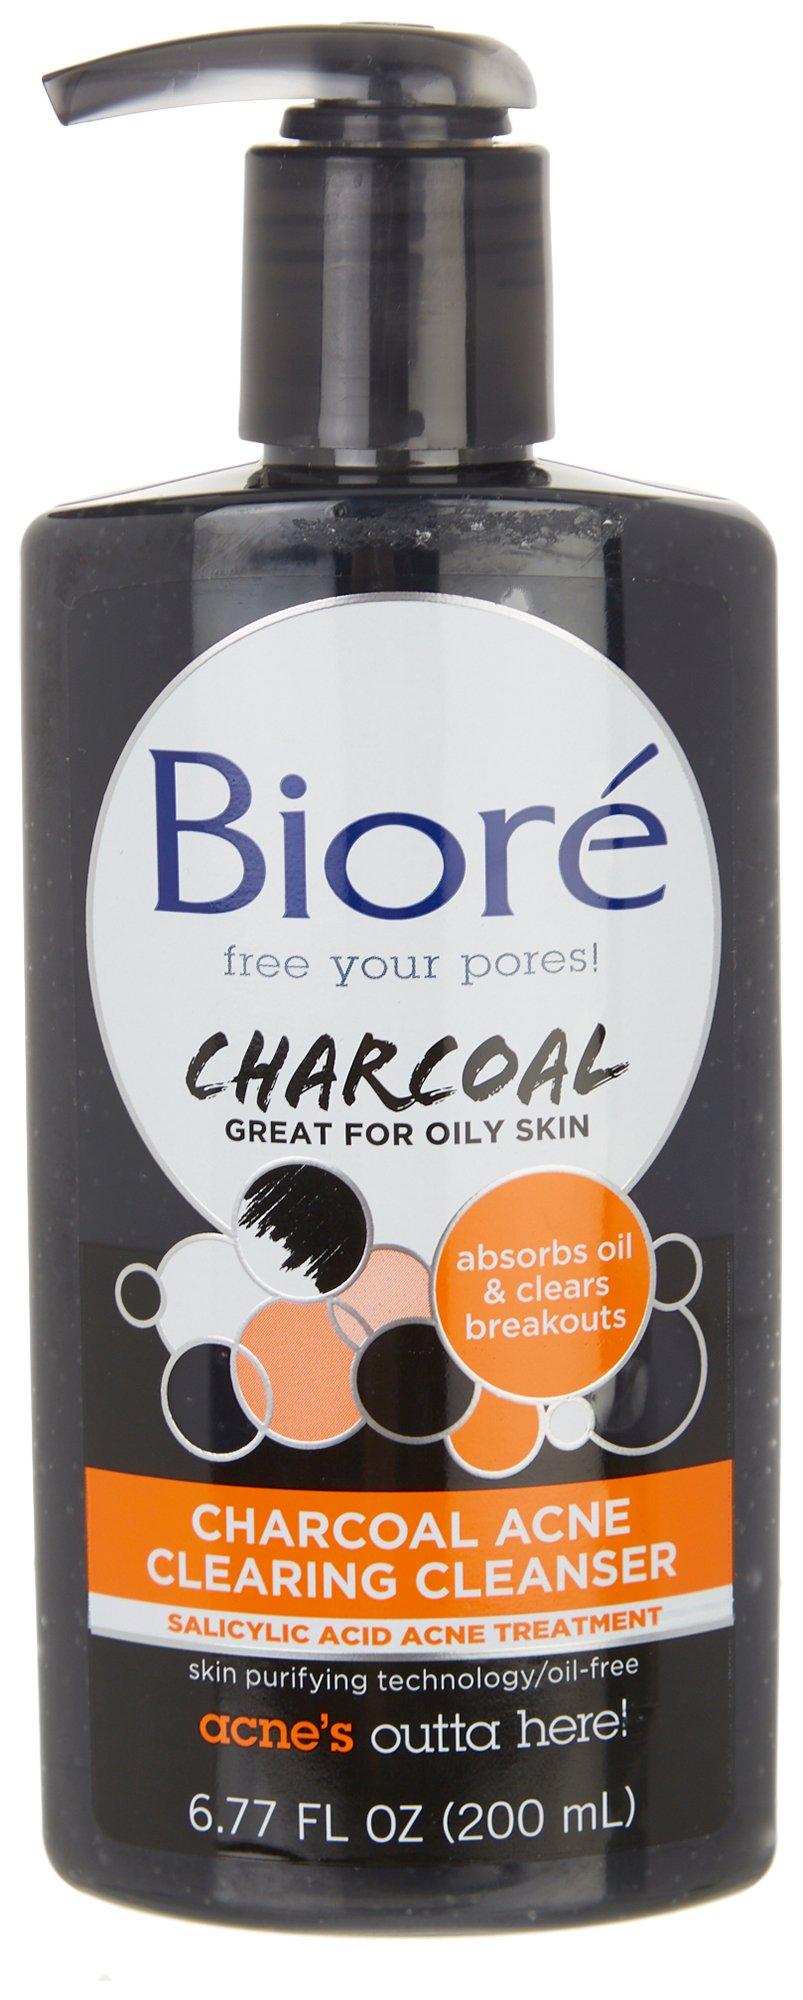 Biore Charcoal Acne Clearing Cleanser For Oily Skin